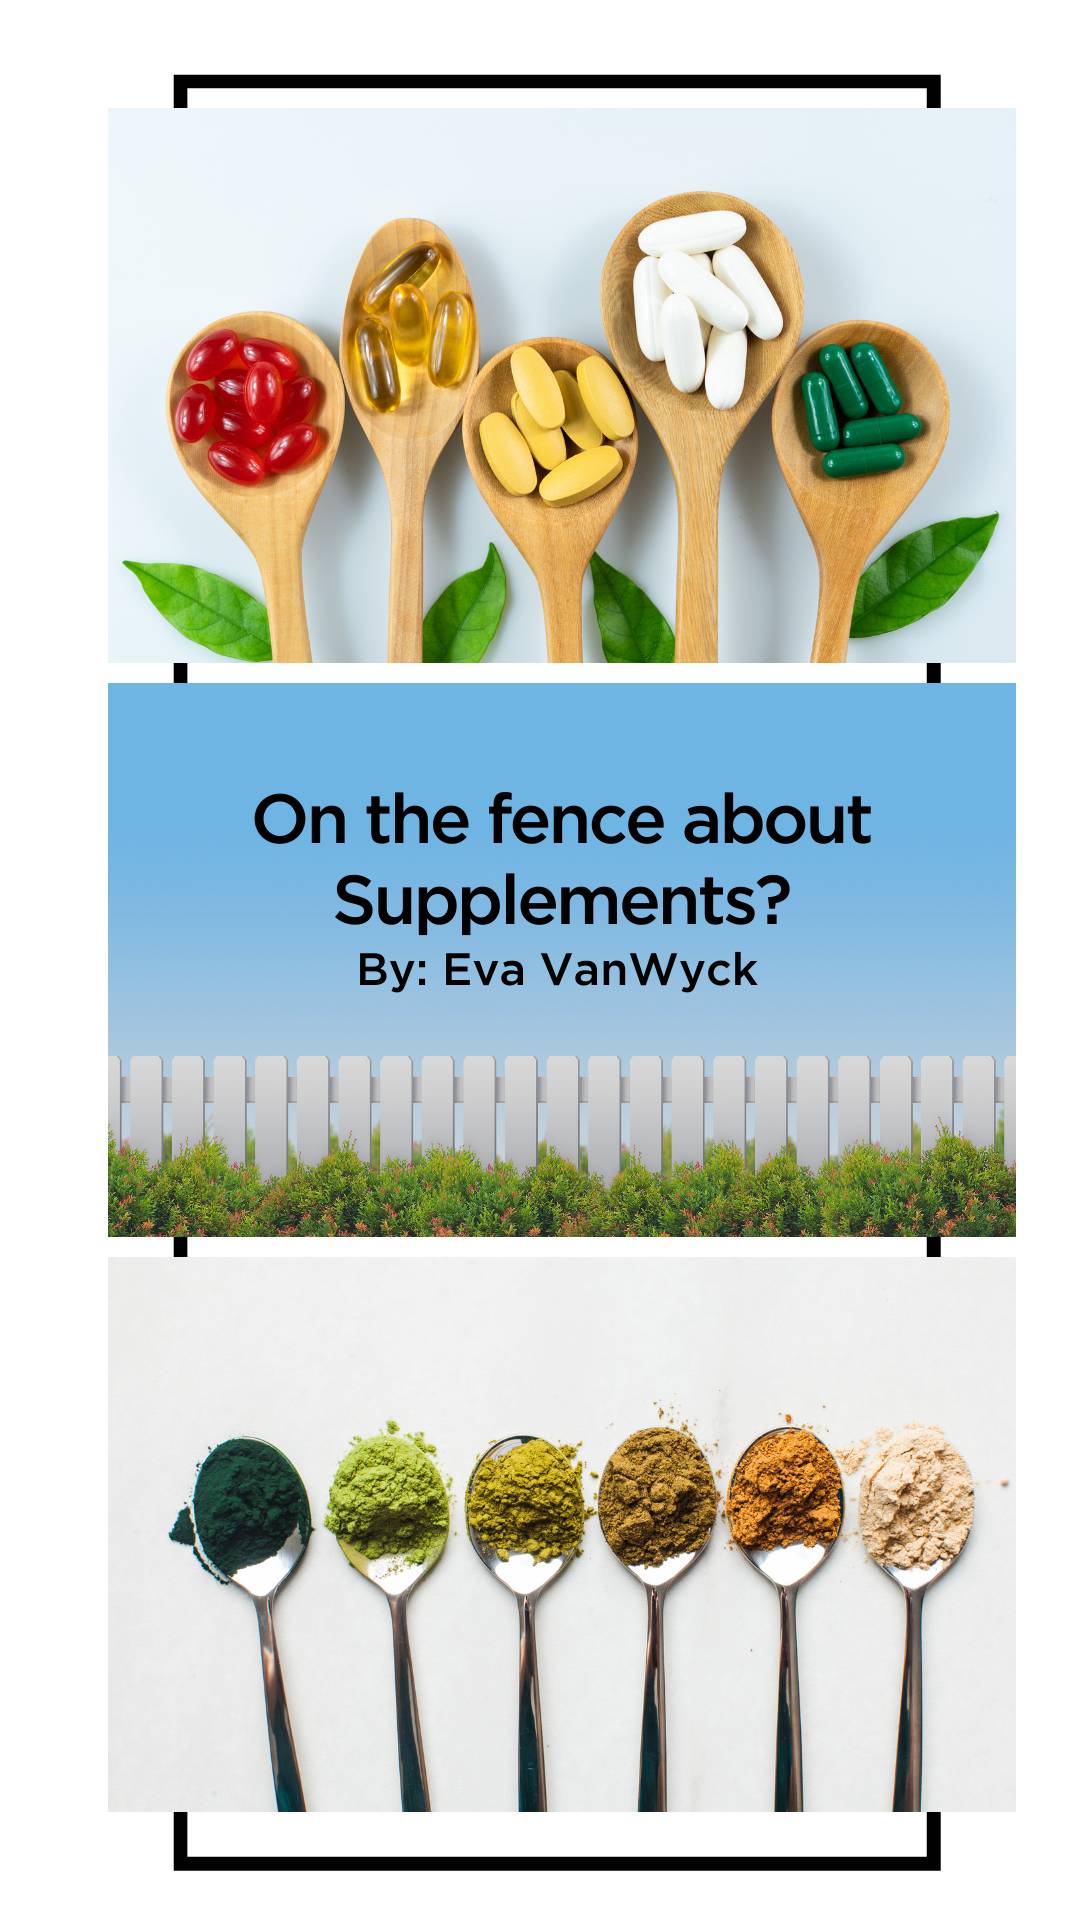 Image of a title page that says "On the fence about supplements? By: Eva VanWyck" over a picture of a fence line, with a picture of pill supplements on spoons and a picture of powdered supplements on spoons.